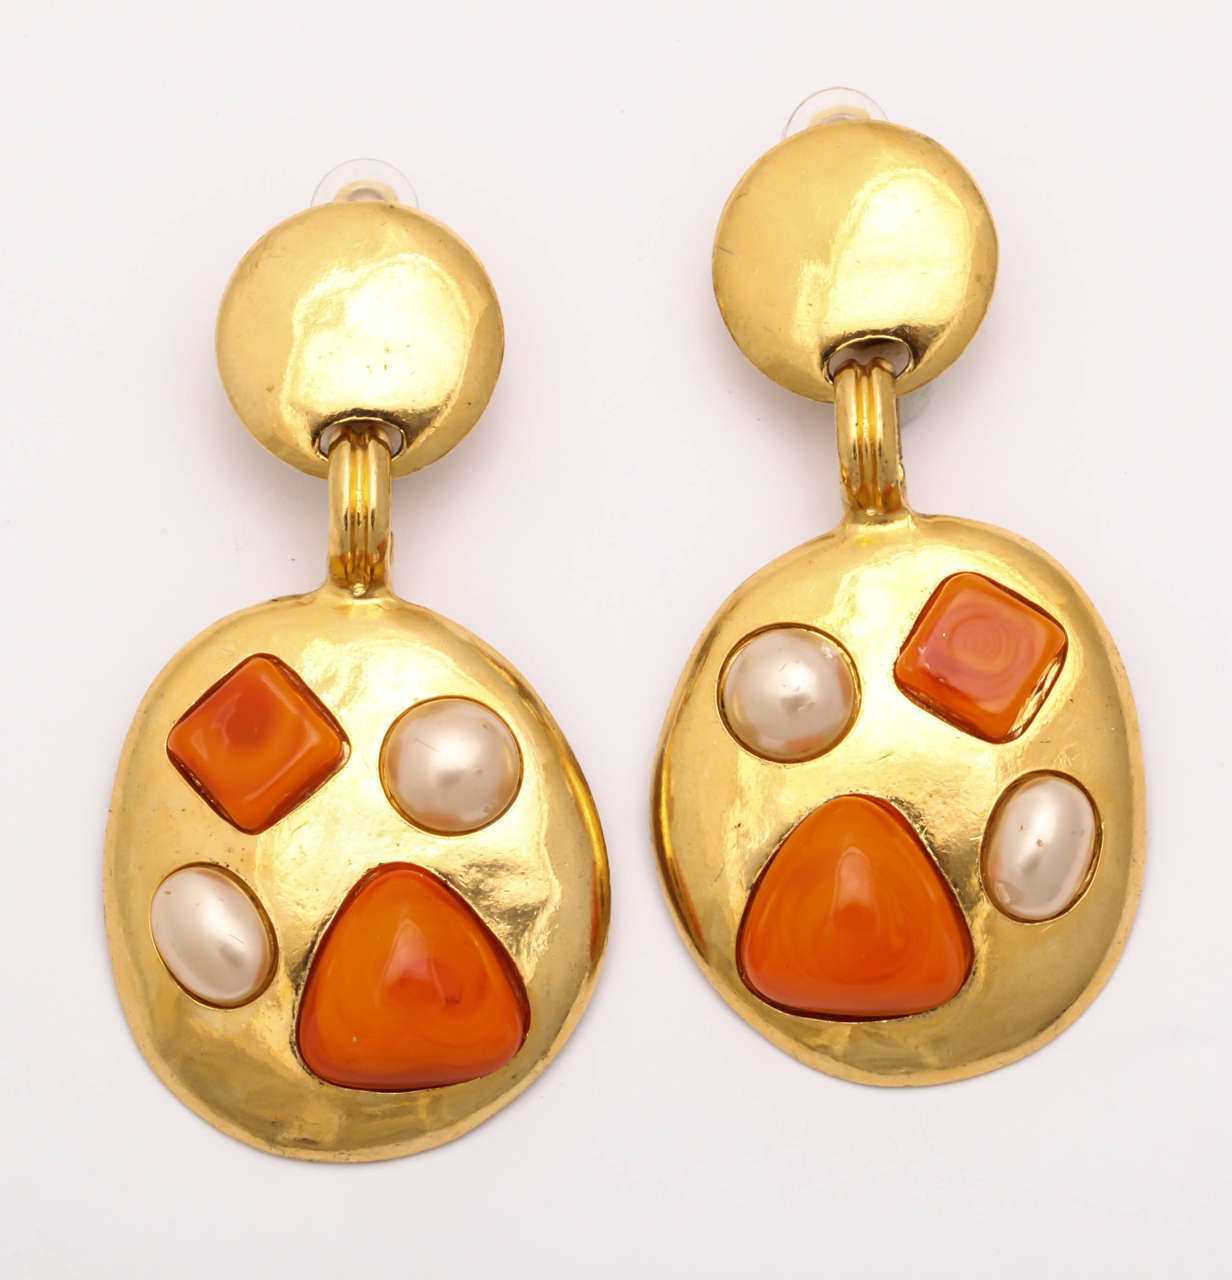 A great pair of faux pearl and coral earrings by Chanel.